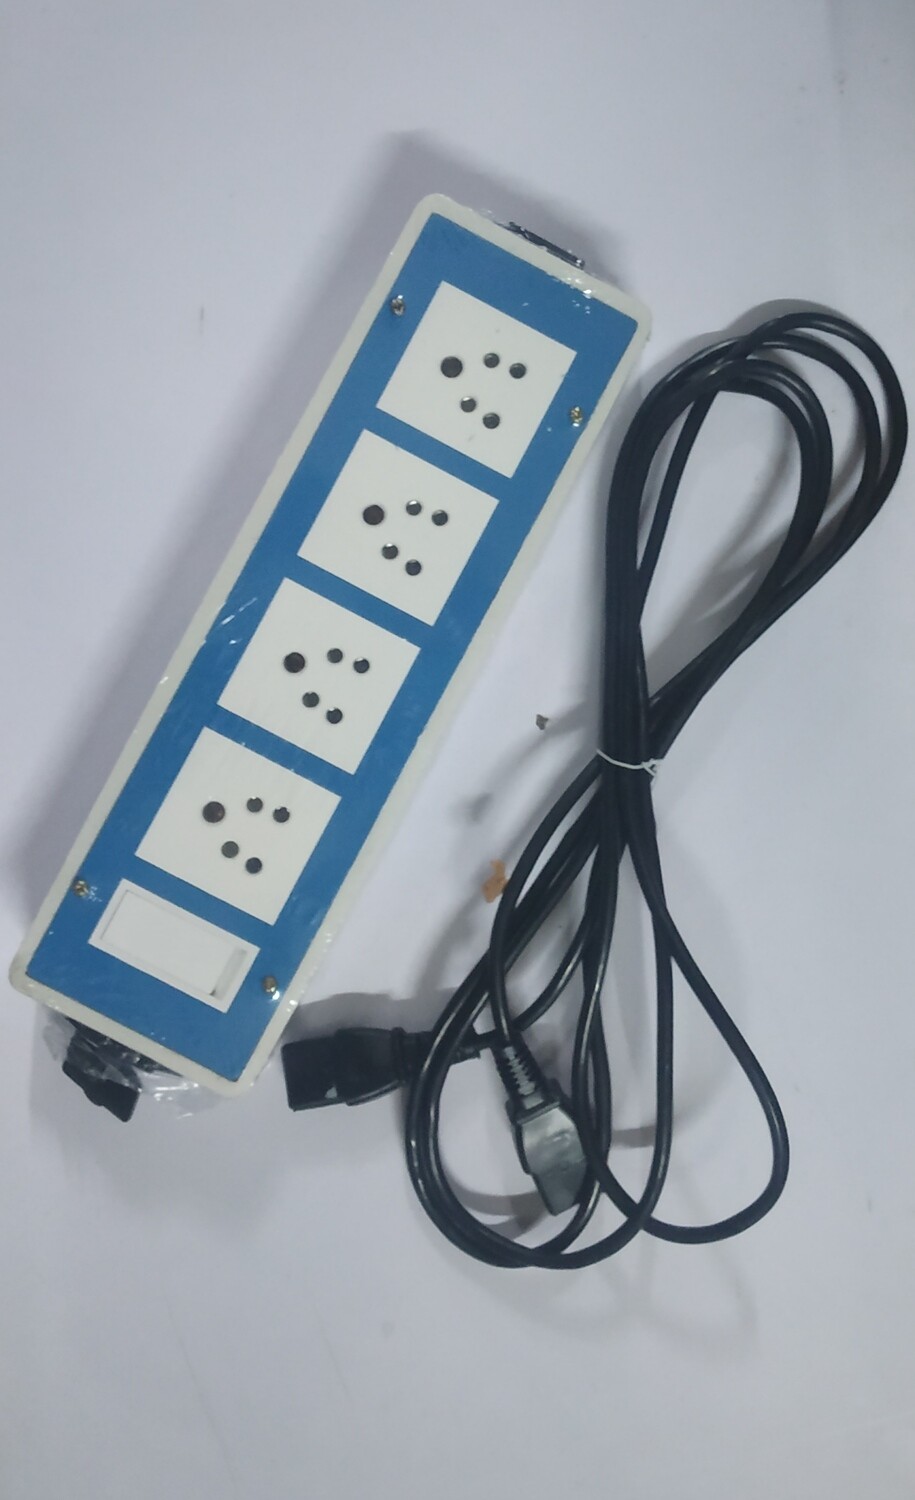 (CW58) Female To Female Power Plug 3 PIN, WIRE LENGTH: 5 METER, BOARD REQUIRED: YES